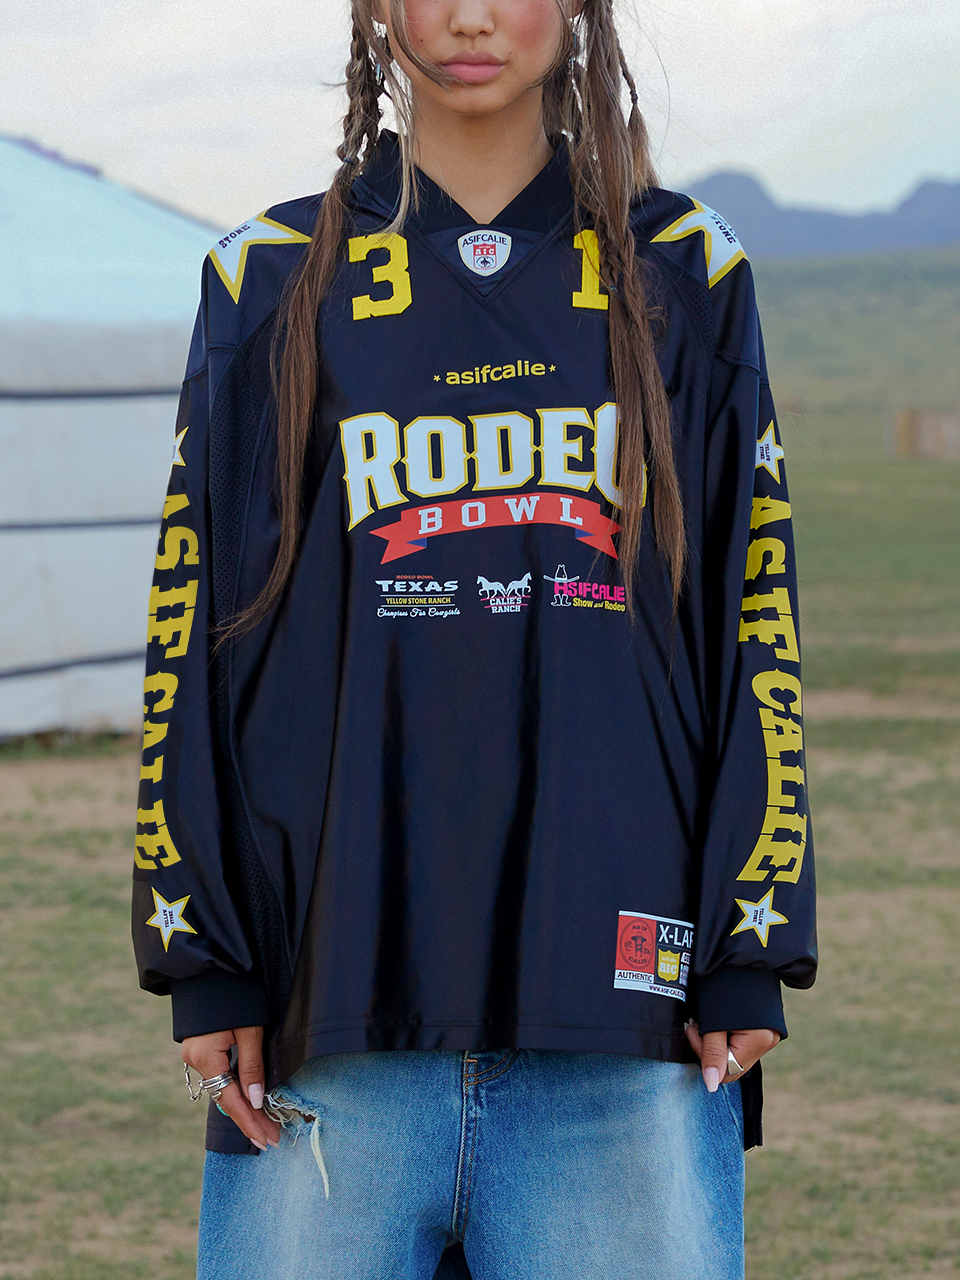 RODEO FOOTBALL JERSEY BLACK  -as if CALIE-